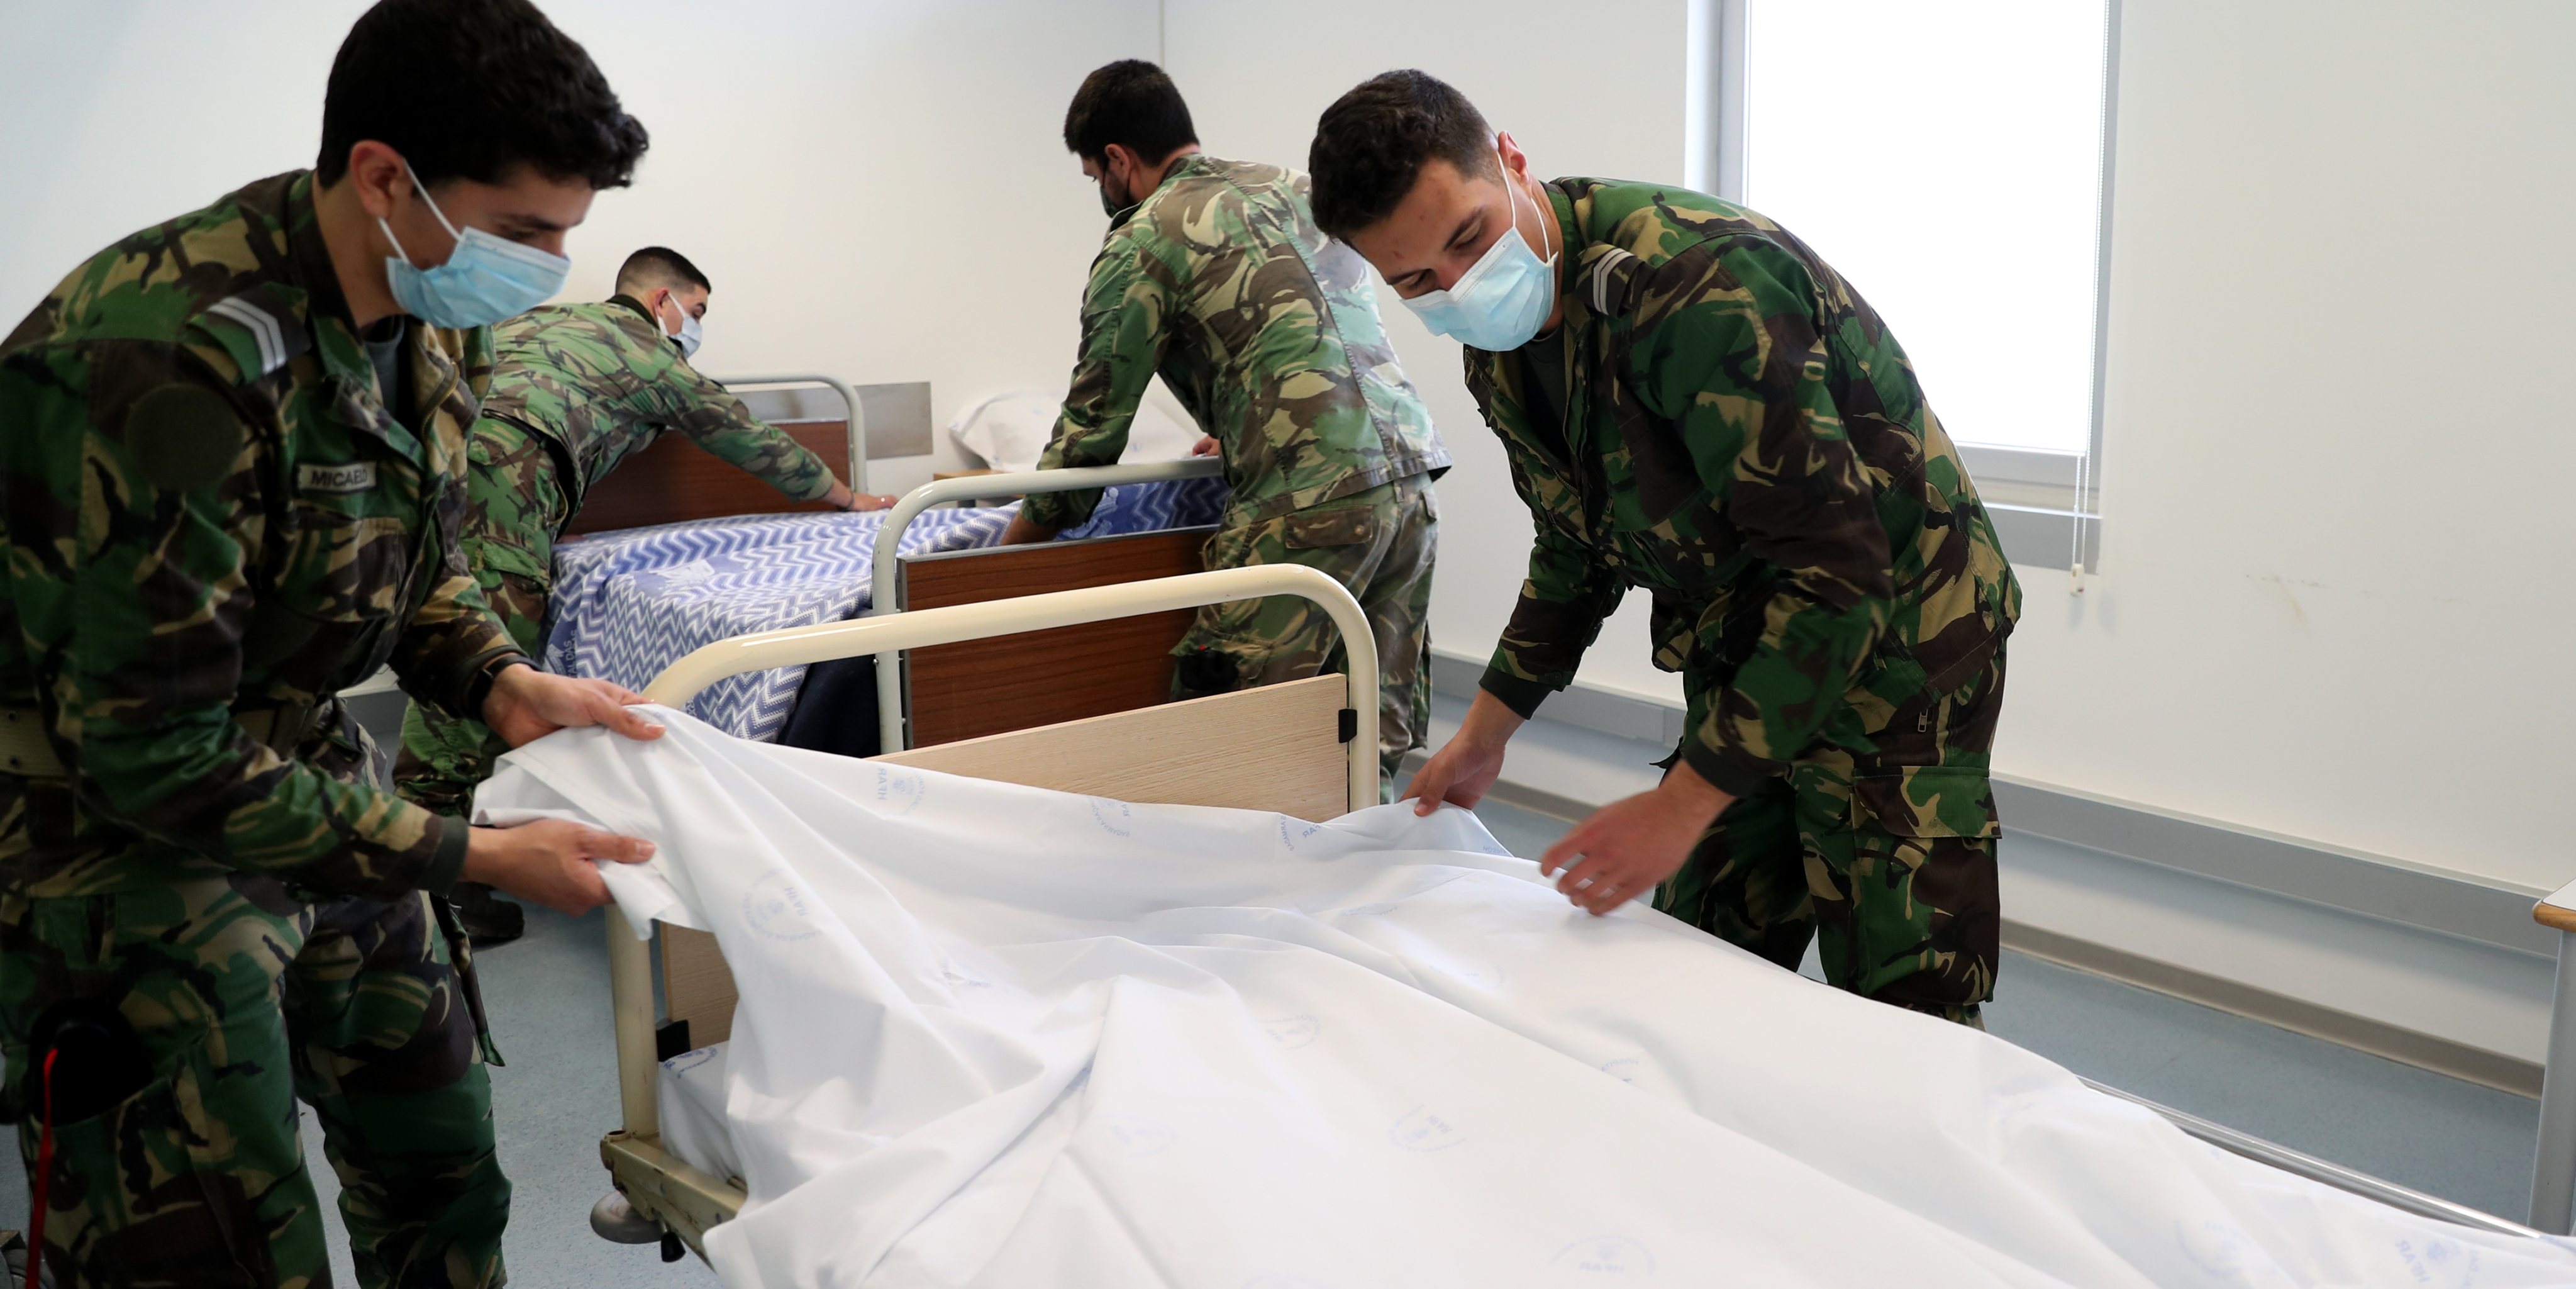 Portuguese President and Prime Minister visit new COVID-19 ward at the Military Hospital in Lisbon